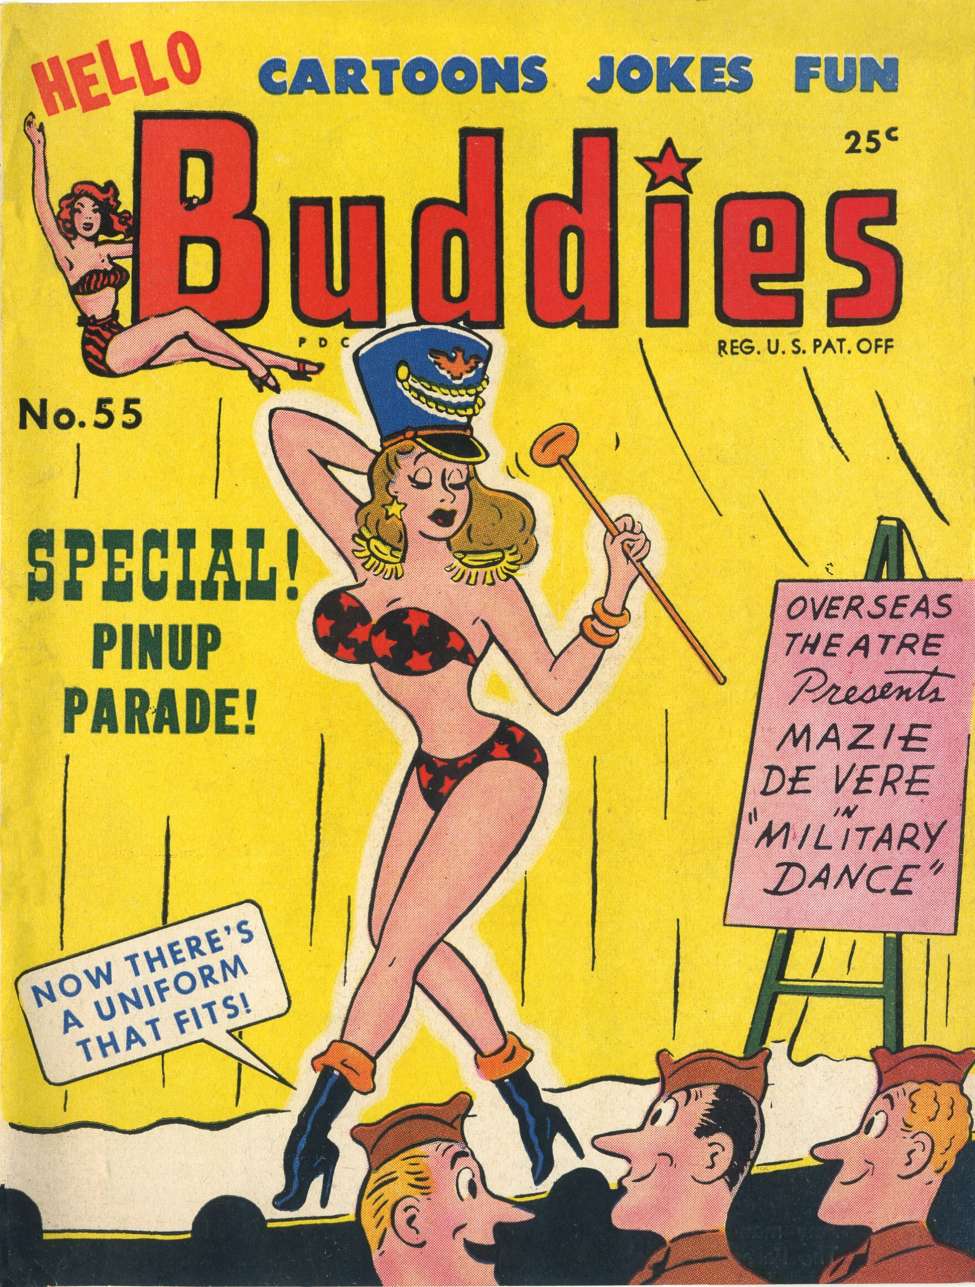 Comic Book Cover For Hello Buddies 55